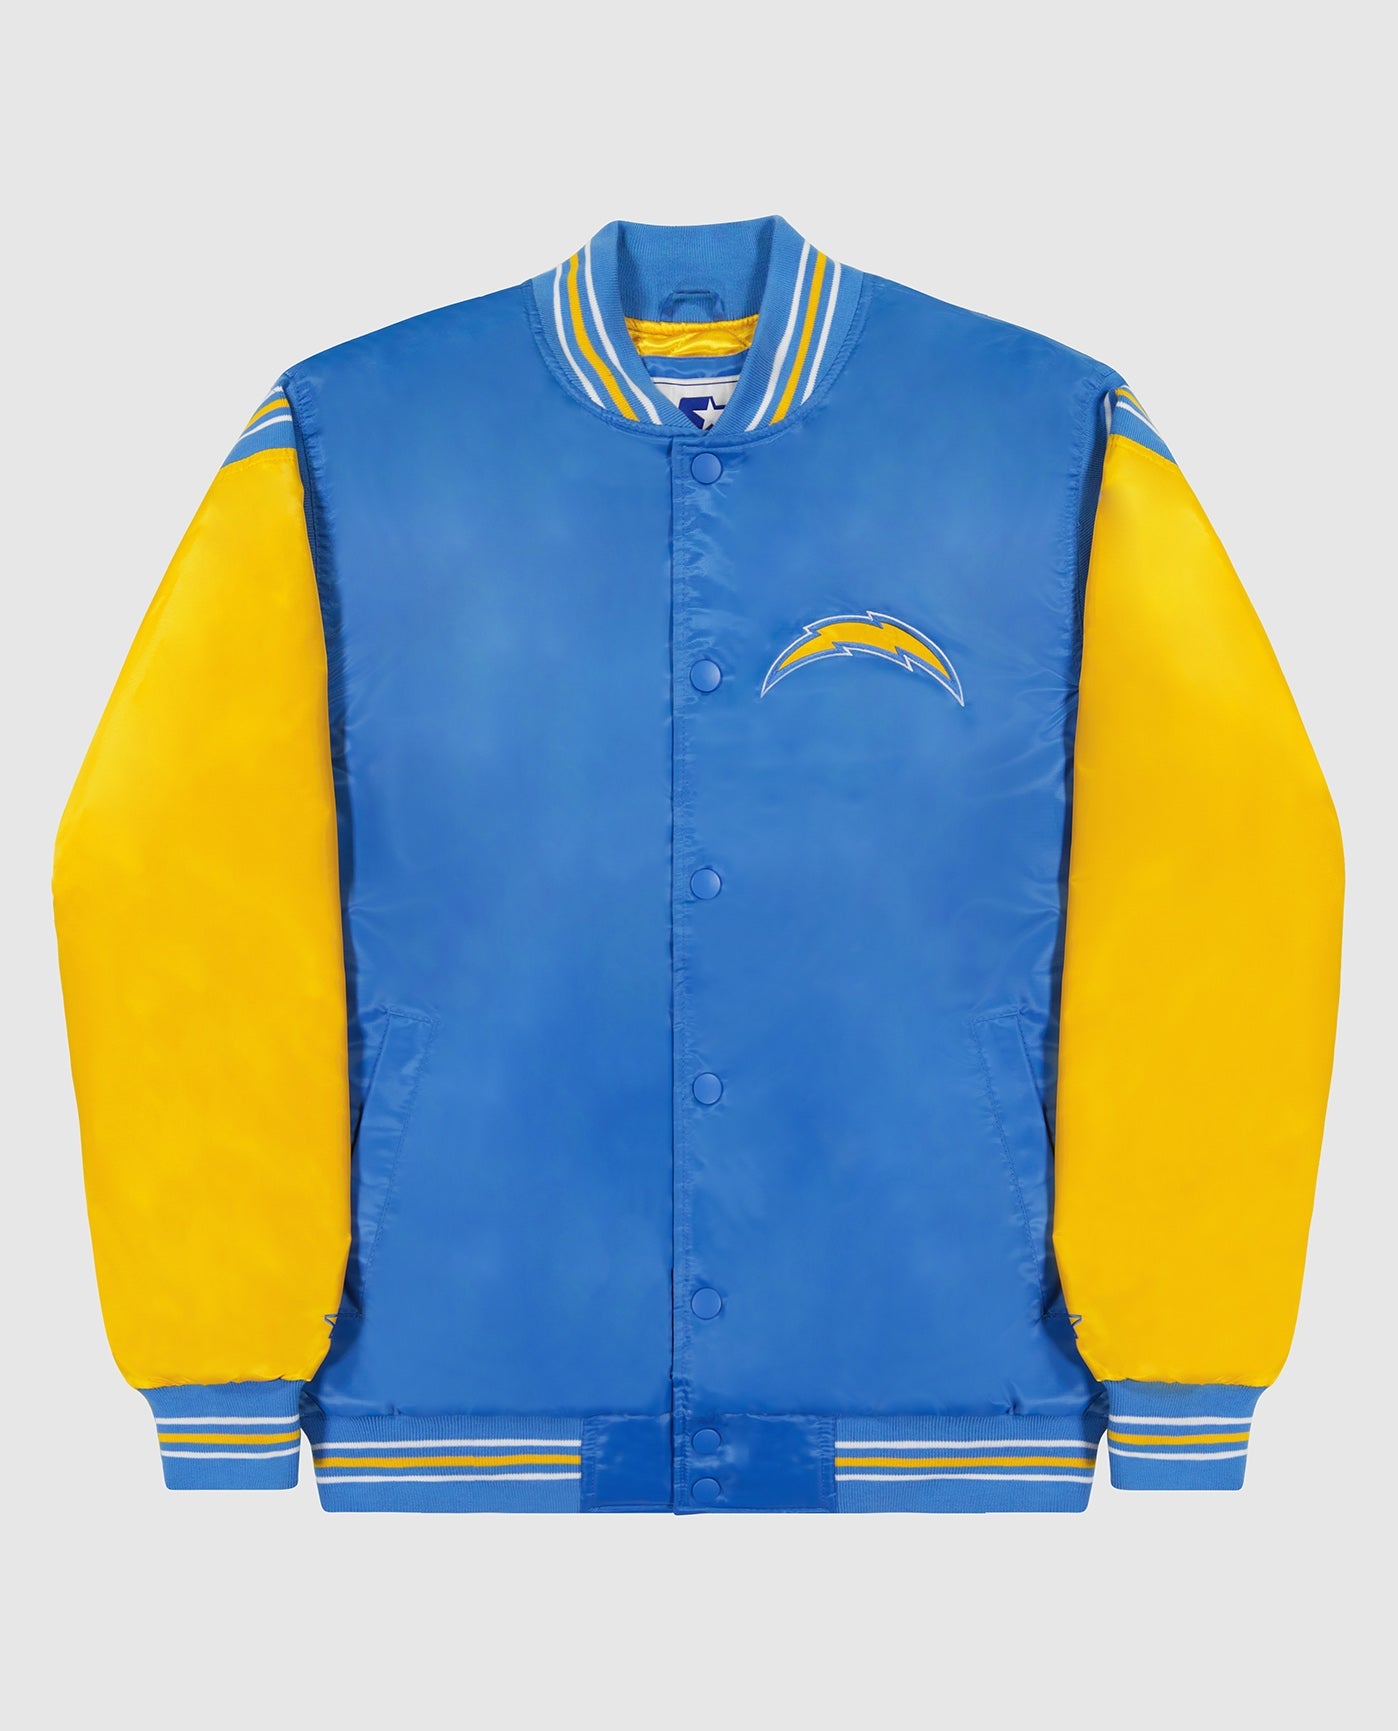 Varsity LA Chargers Yellow and Light Blue Jacket